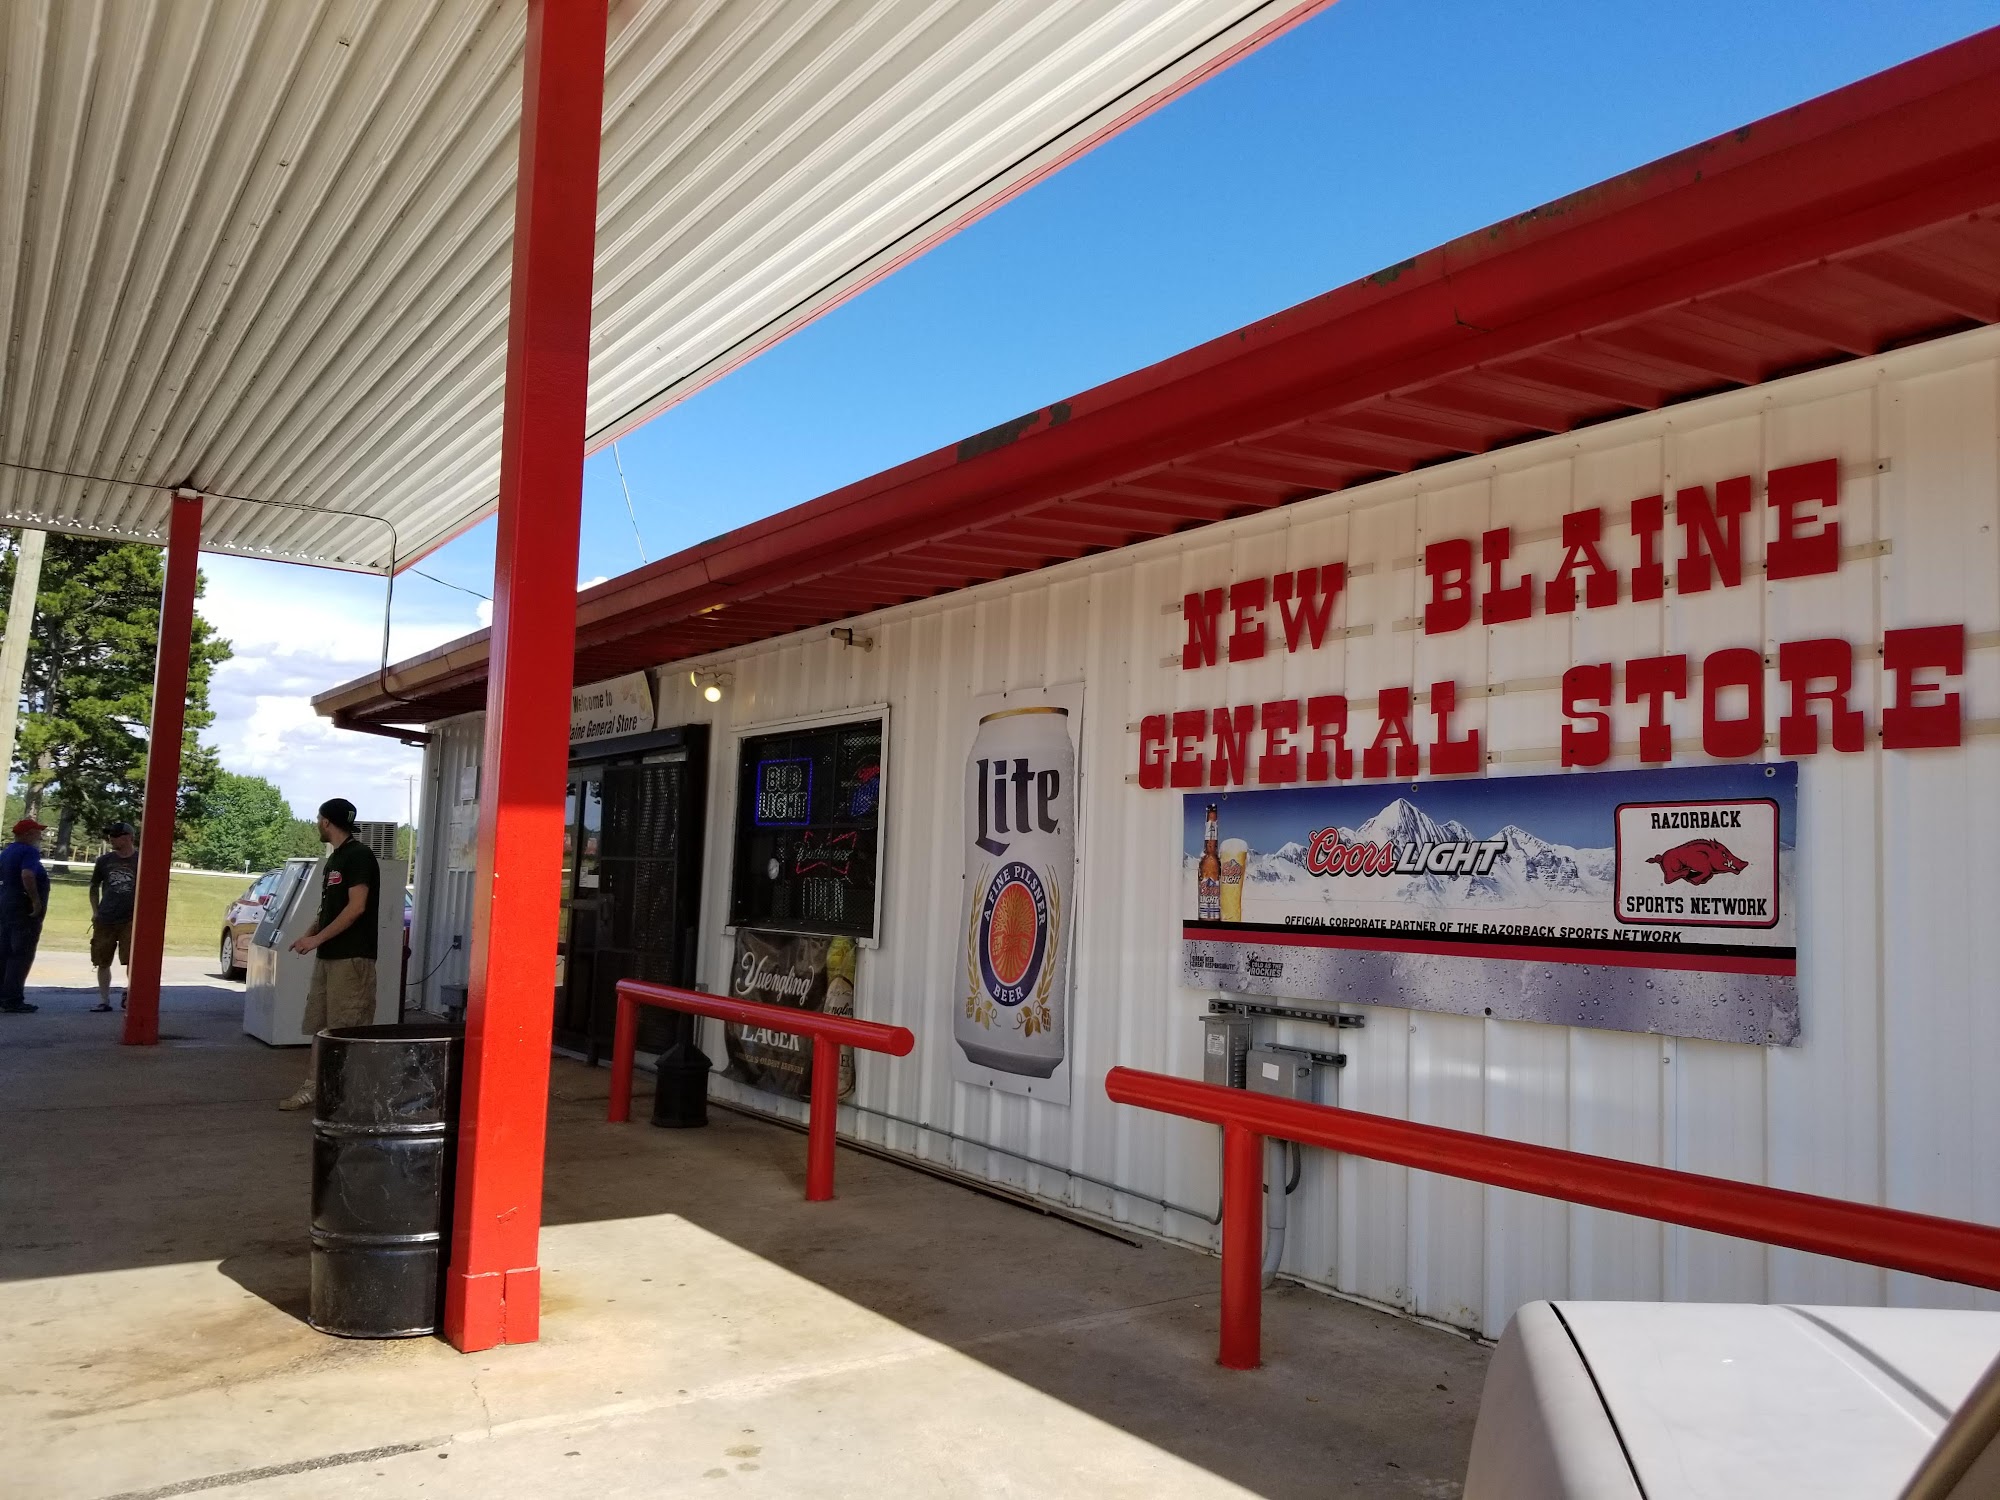 New Blaine General Store